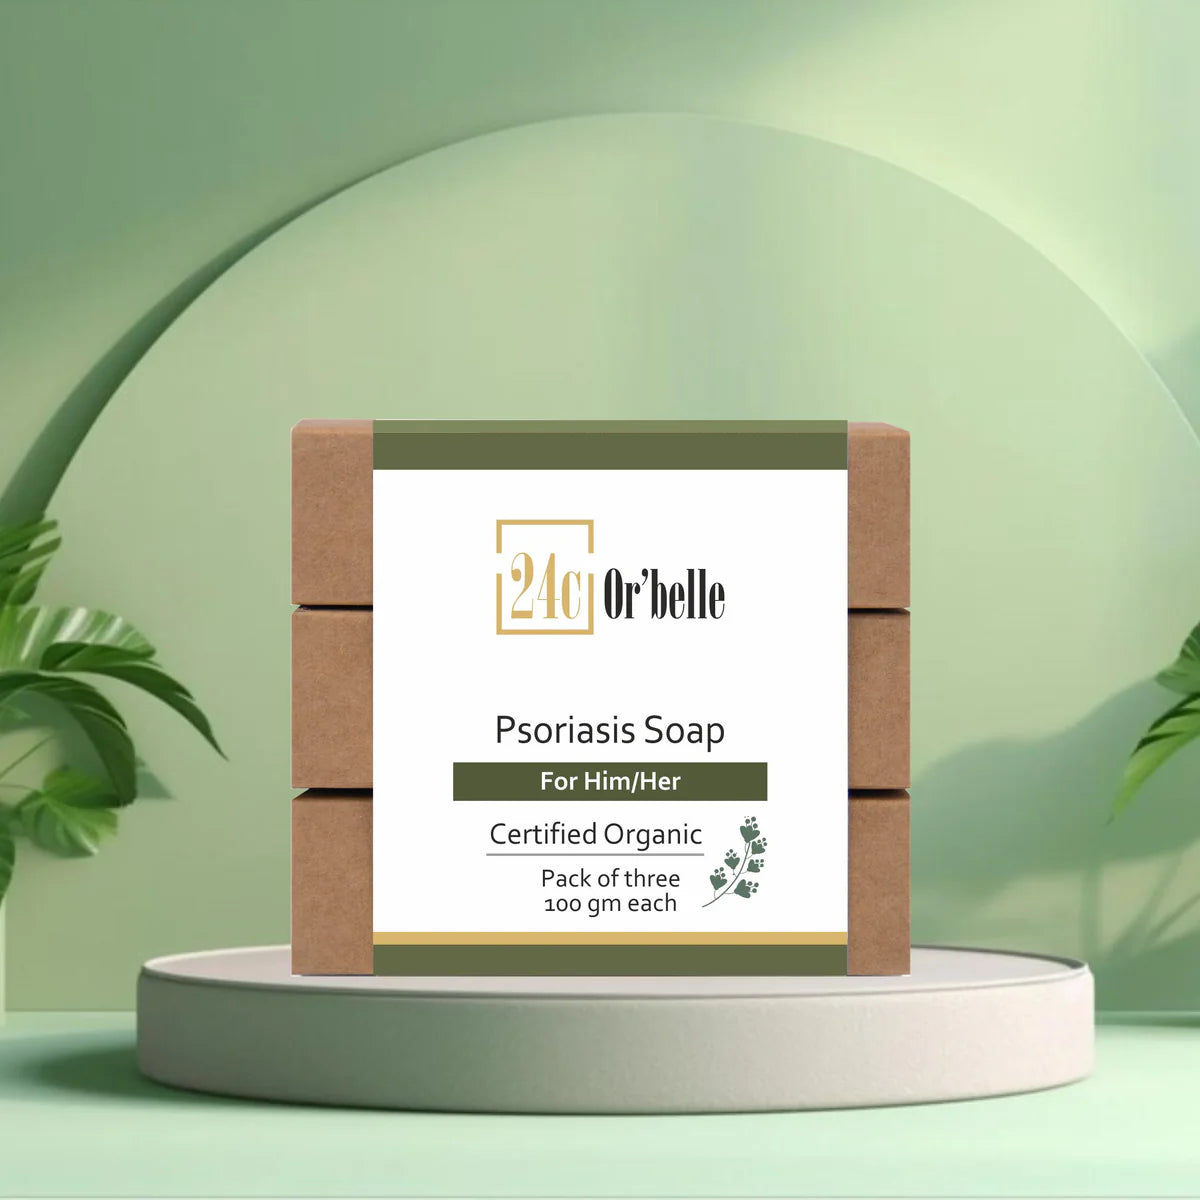 Discover the Soothing Benefits of Psoriasis Soap